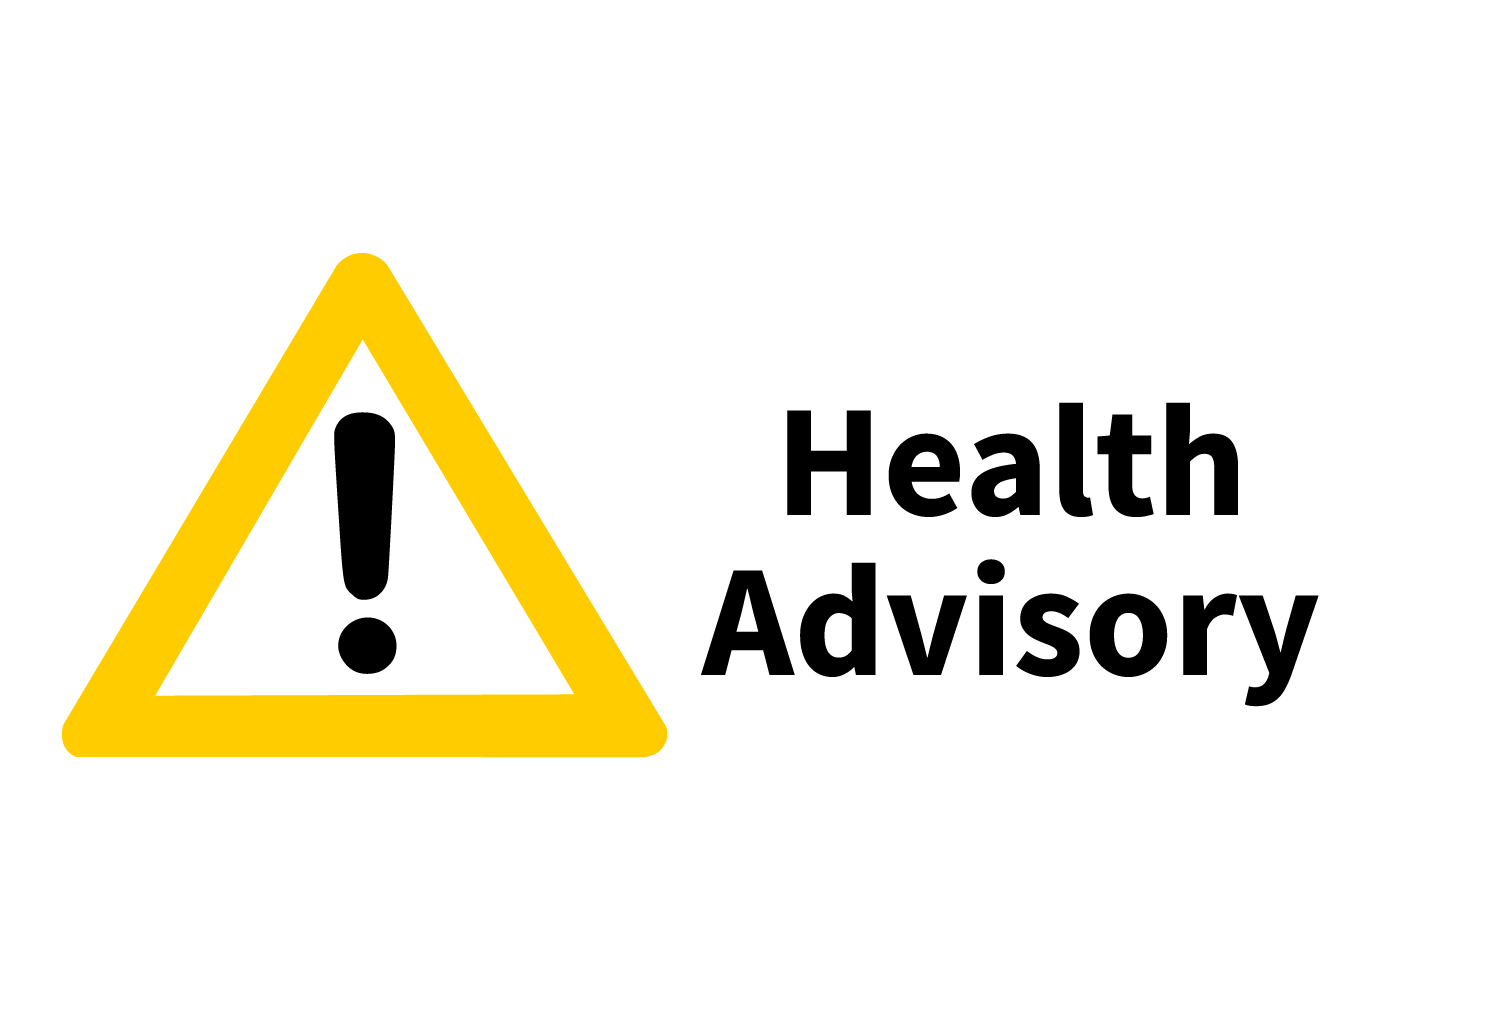 Warning yellow triangle with black exclamation point on left. "Health Advisory" on right.